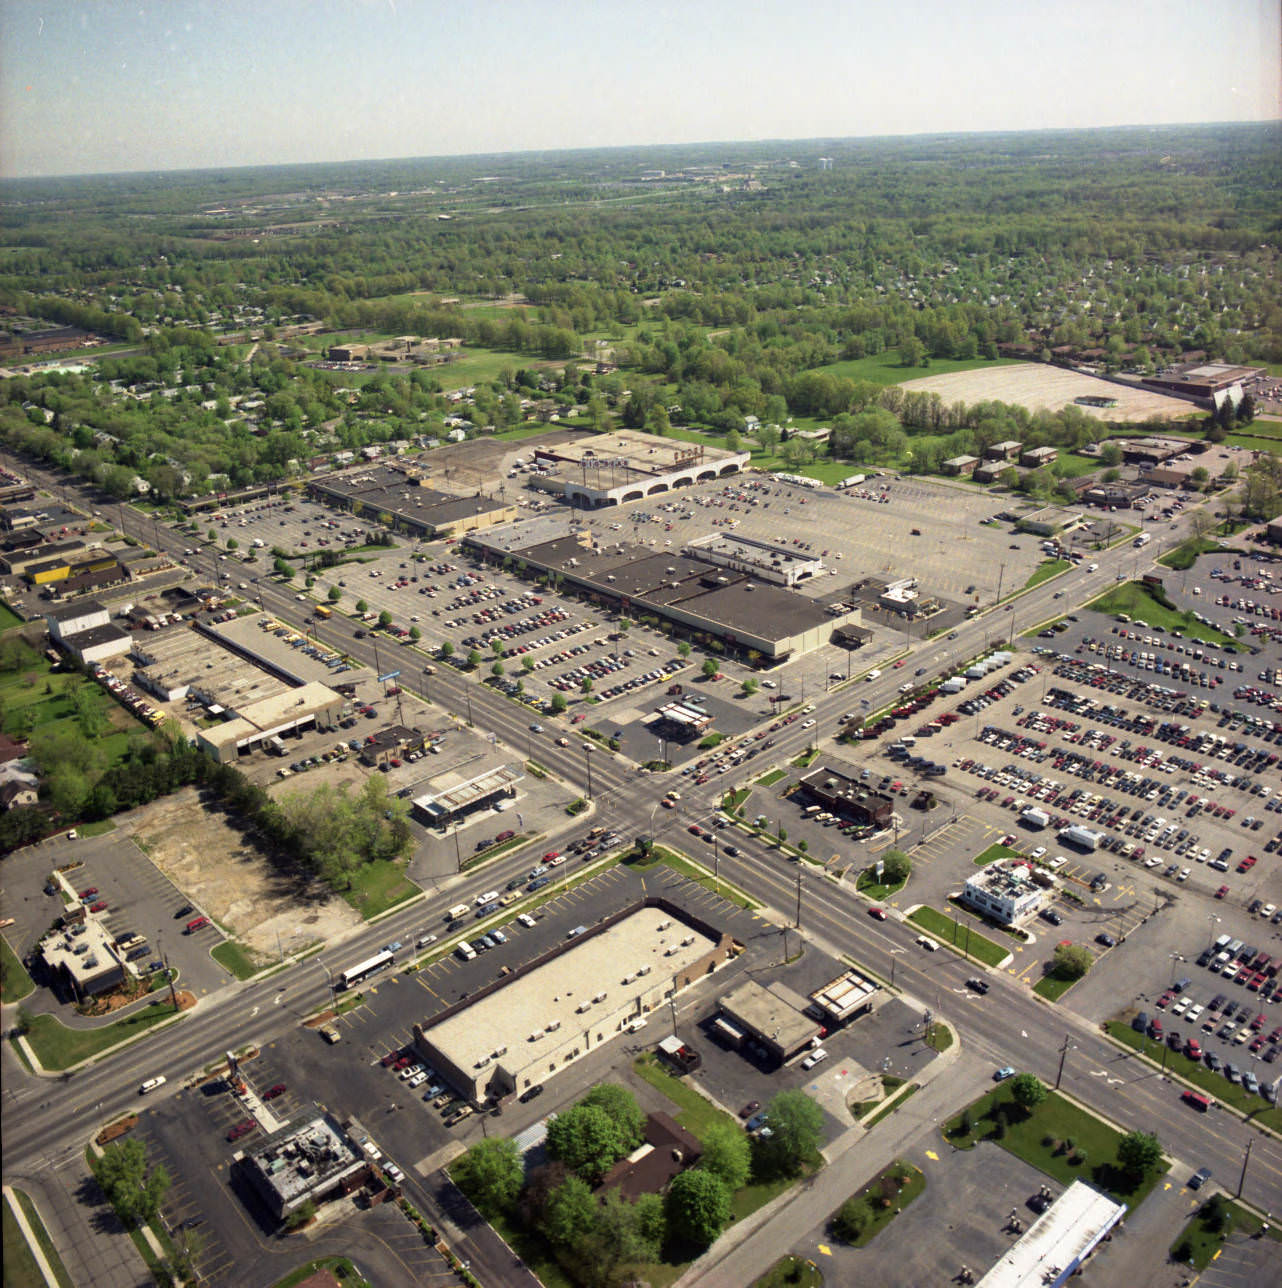 Aerial views of Great Eastern Shopping Center, located at East Main Street and Hamilton Road, circa 1986.